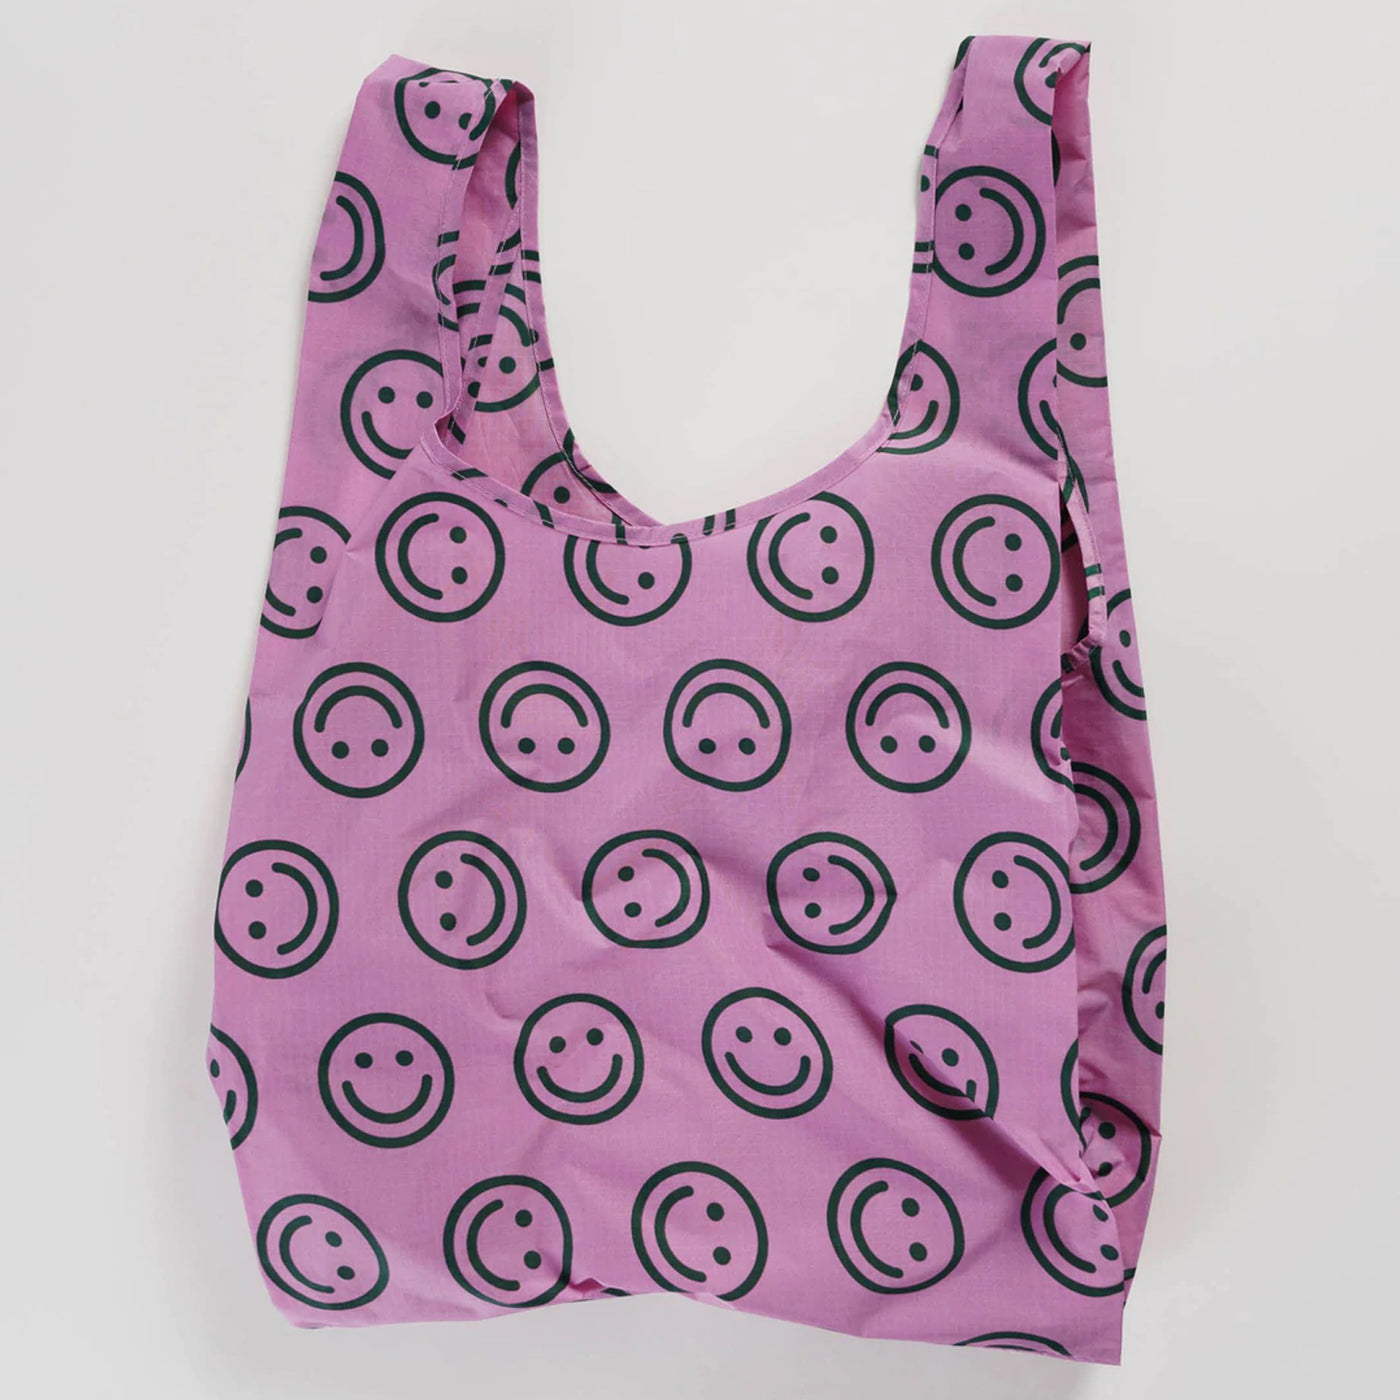 Baggu reusable tote bag in standard size with a happy face pattern in raspberry color